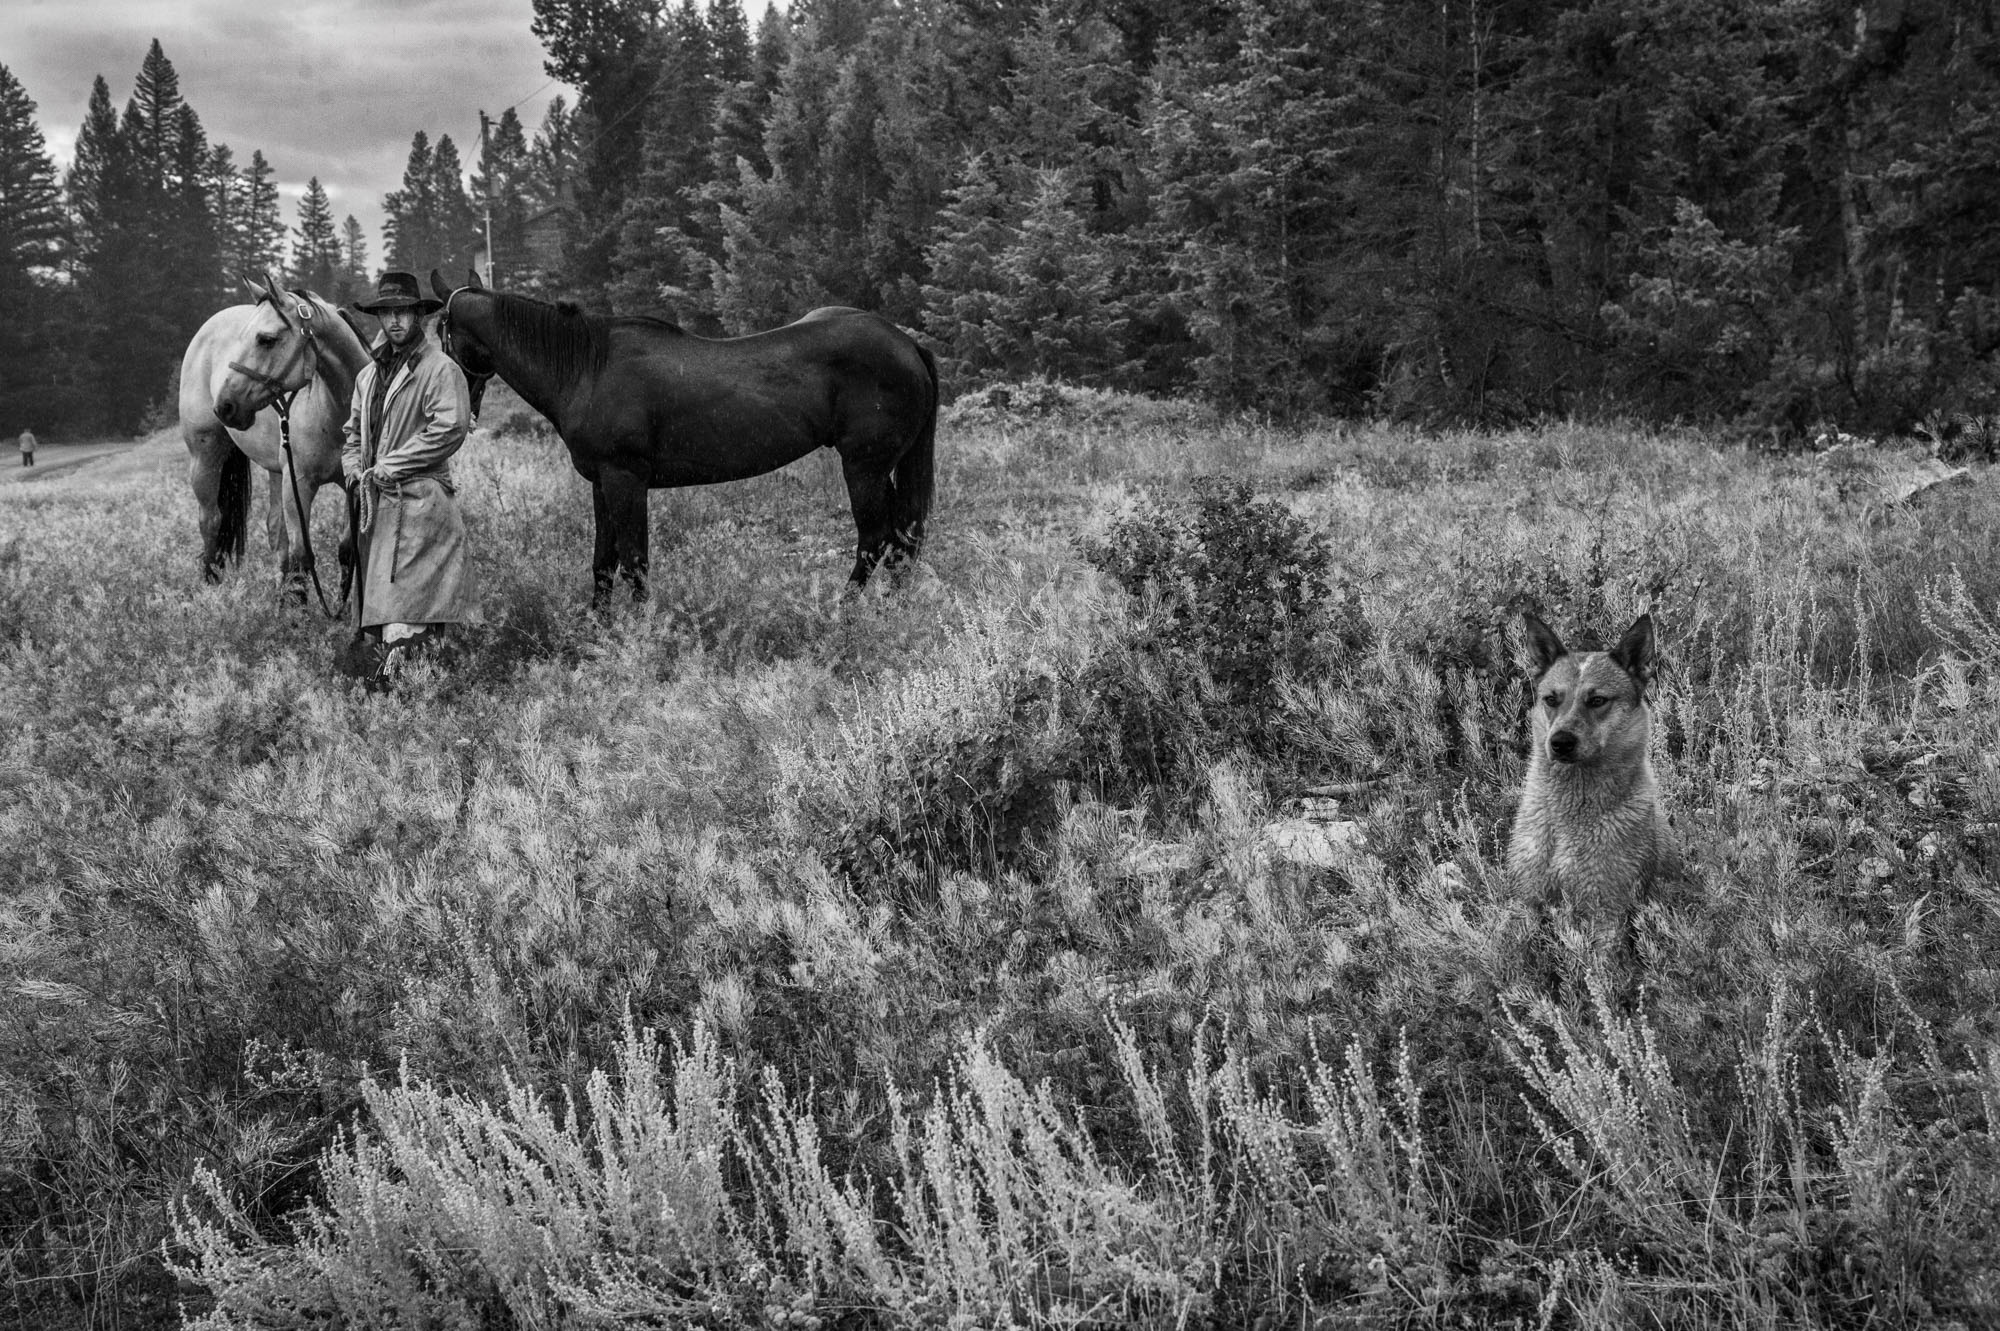 Fine Art Limited Edition Photo Prints of Cowboys, Horses, and life in the West. Dog'n it! Cowboy pictures in black and white....